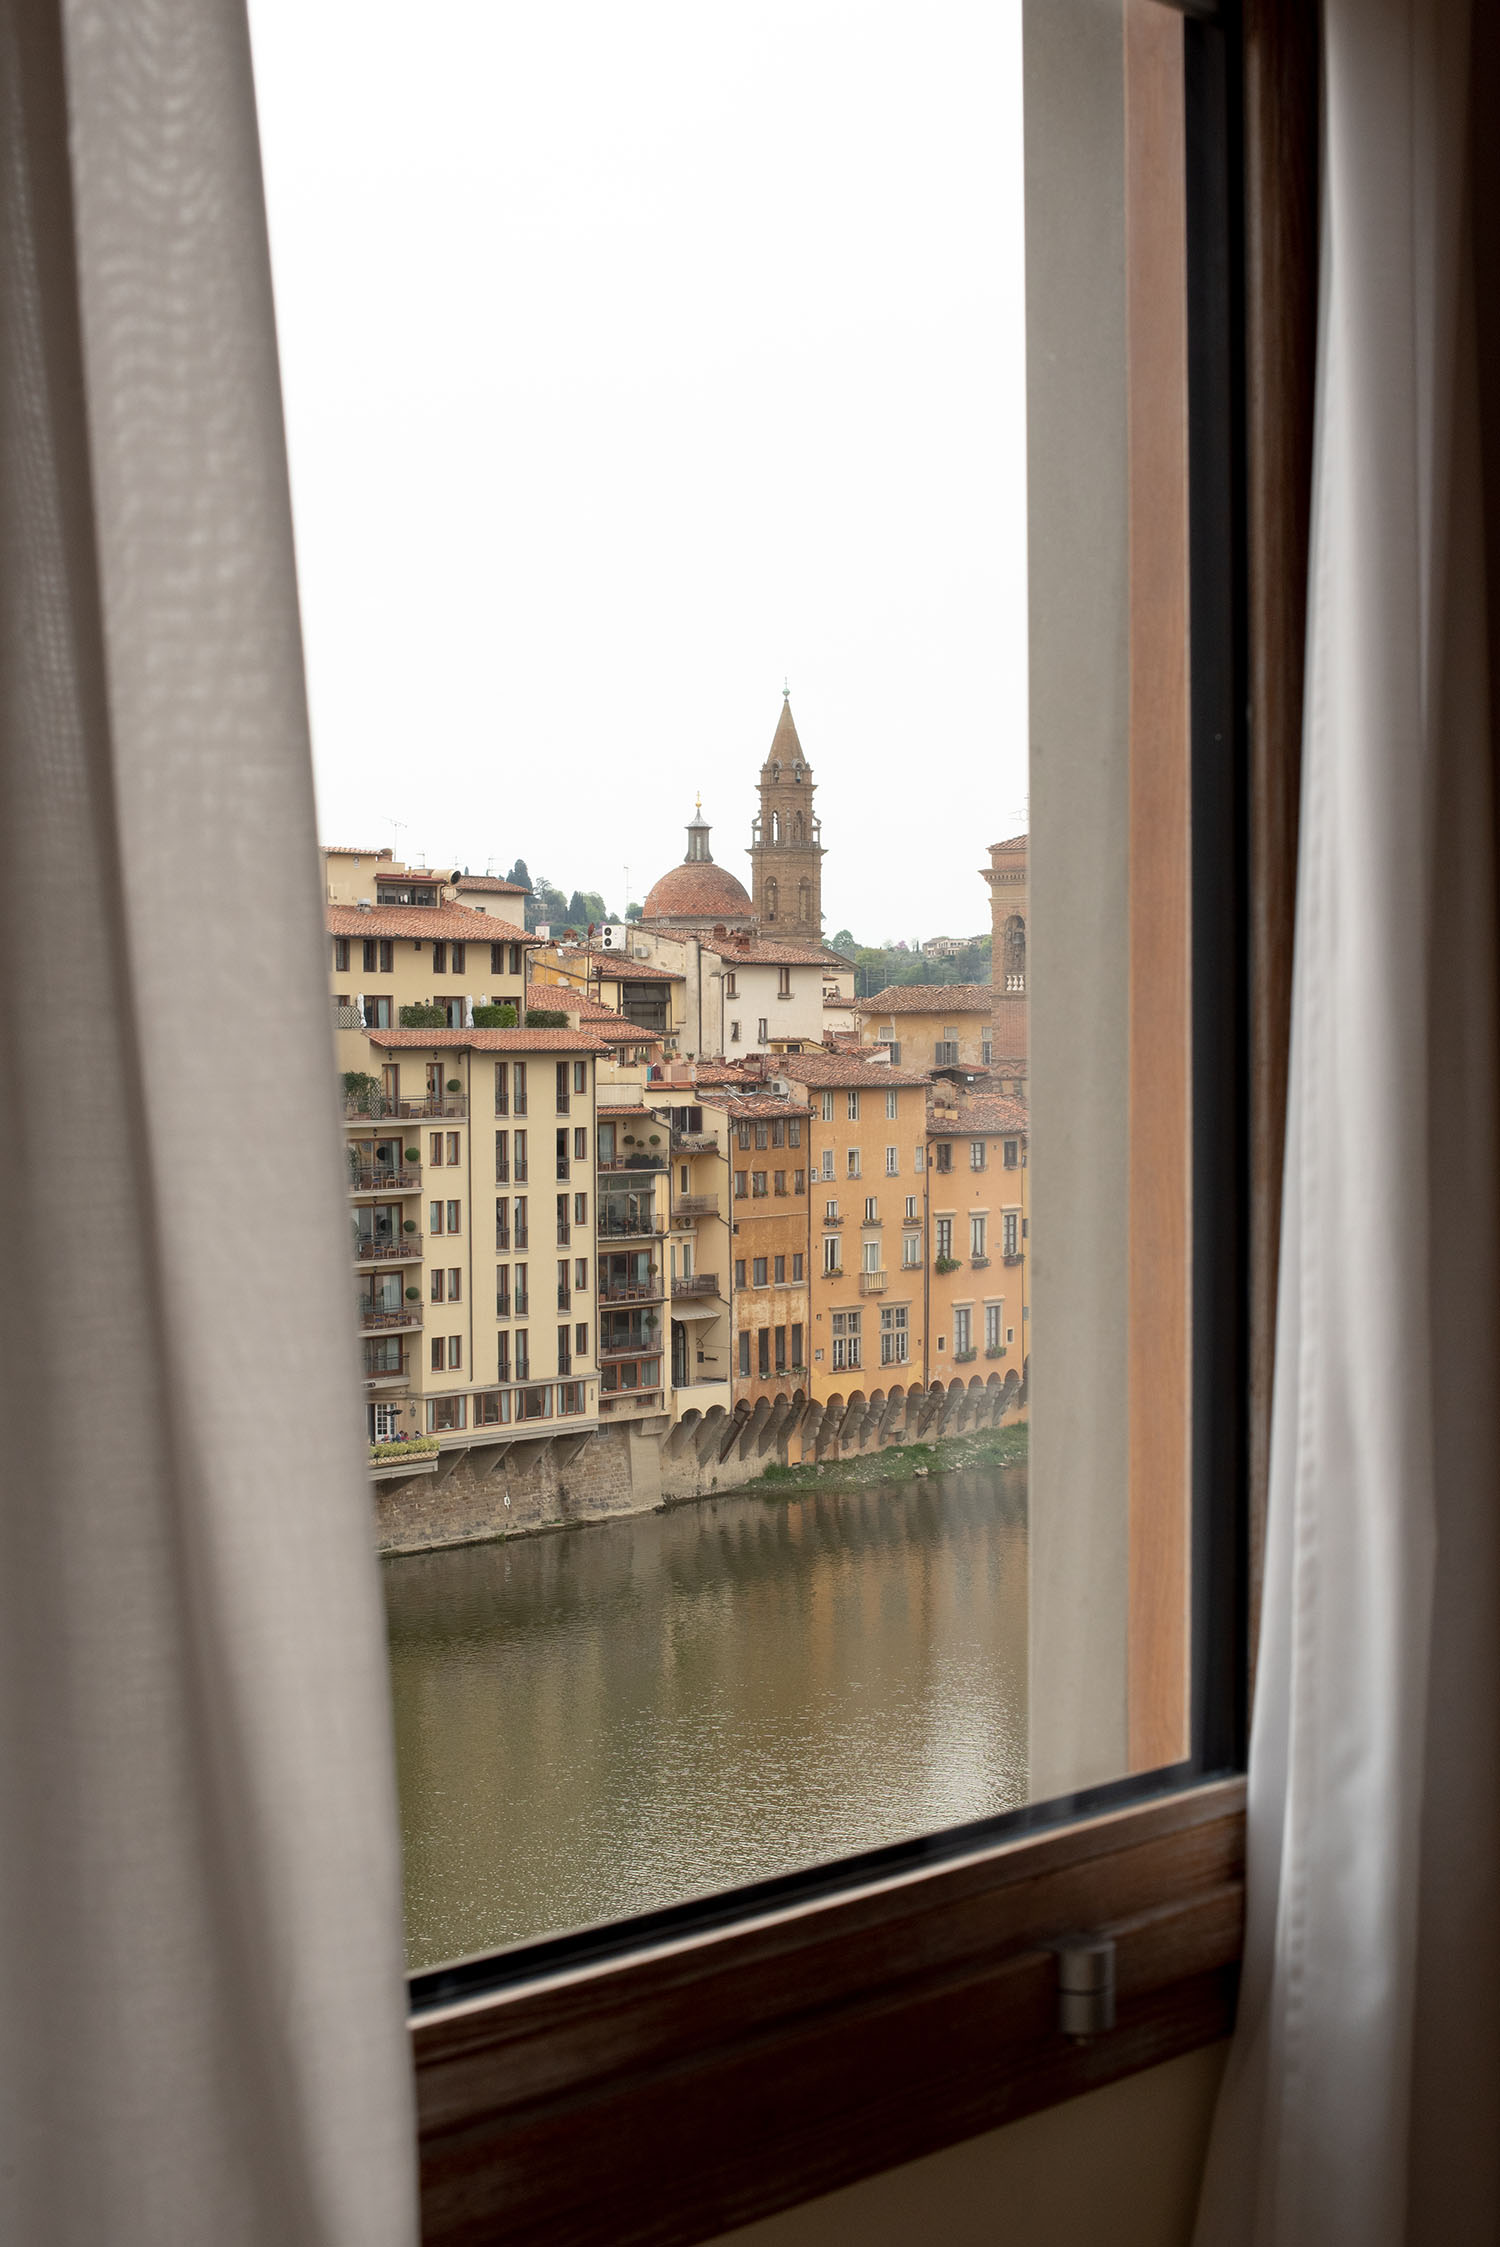 Coco & Vera - Views of the Arno River from the Hotel Continentale in Florence, Italy